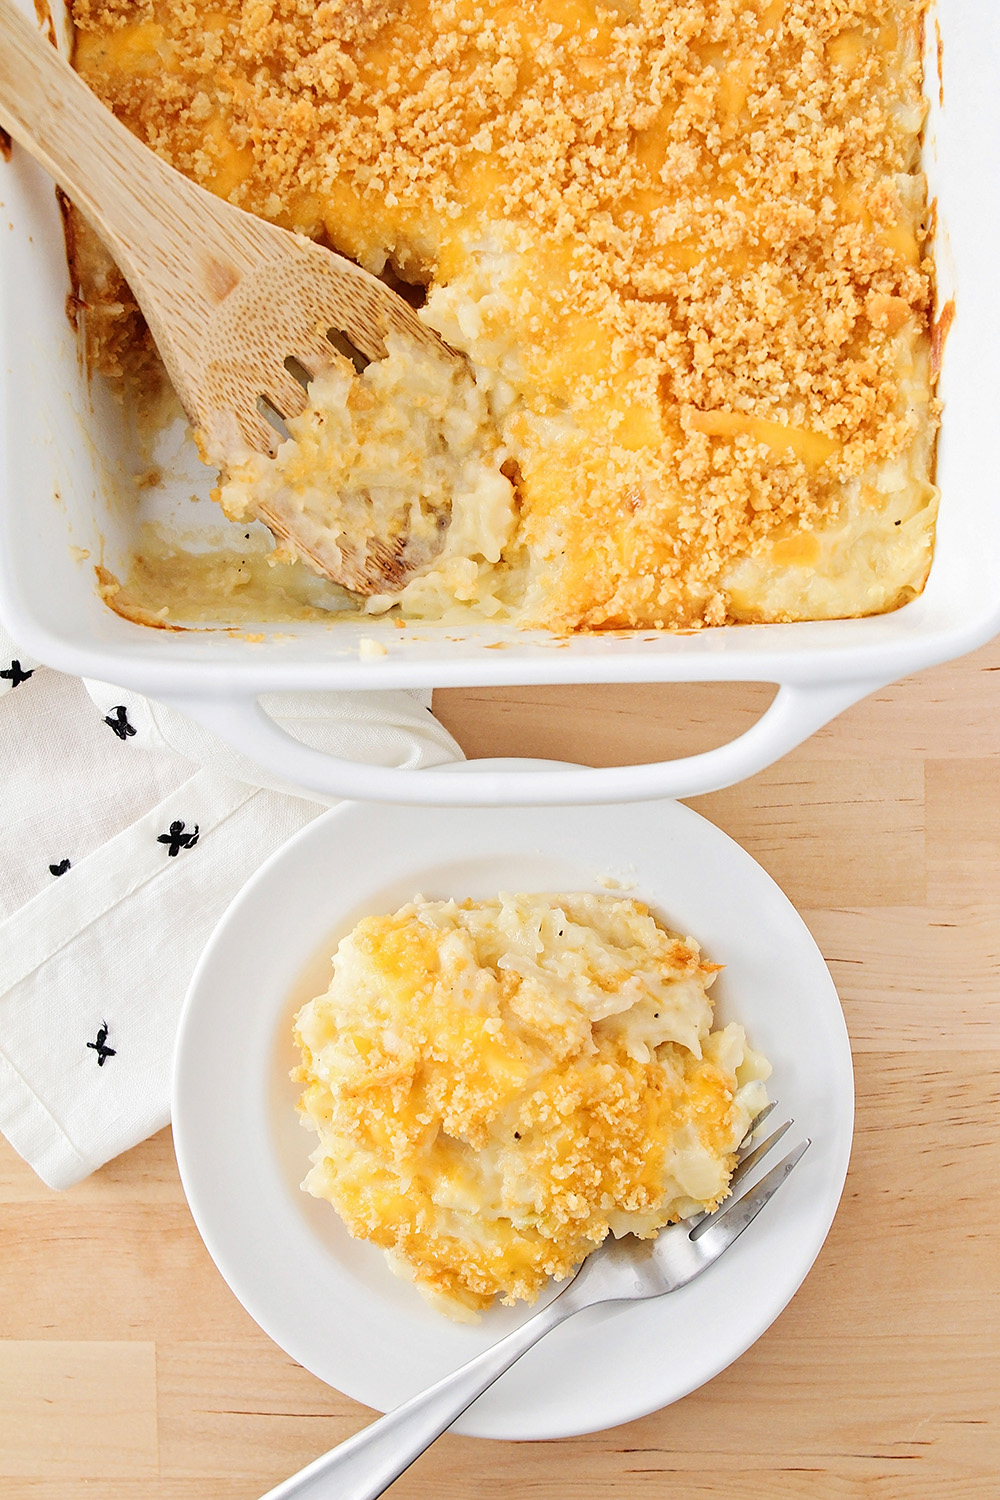 This cheesy potato casserole is the most delicious comfort food! It's made totally from scratch, with a creamy homemade sauce and so much cheesy goodness!